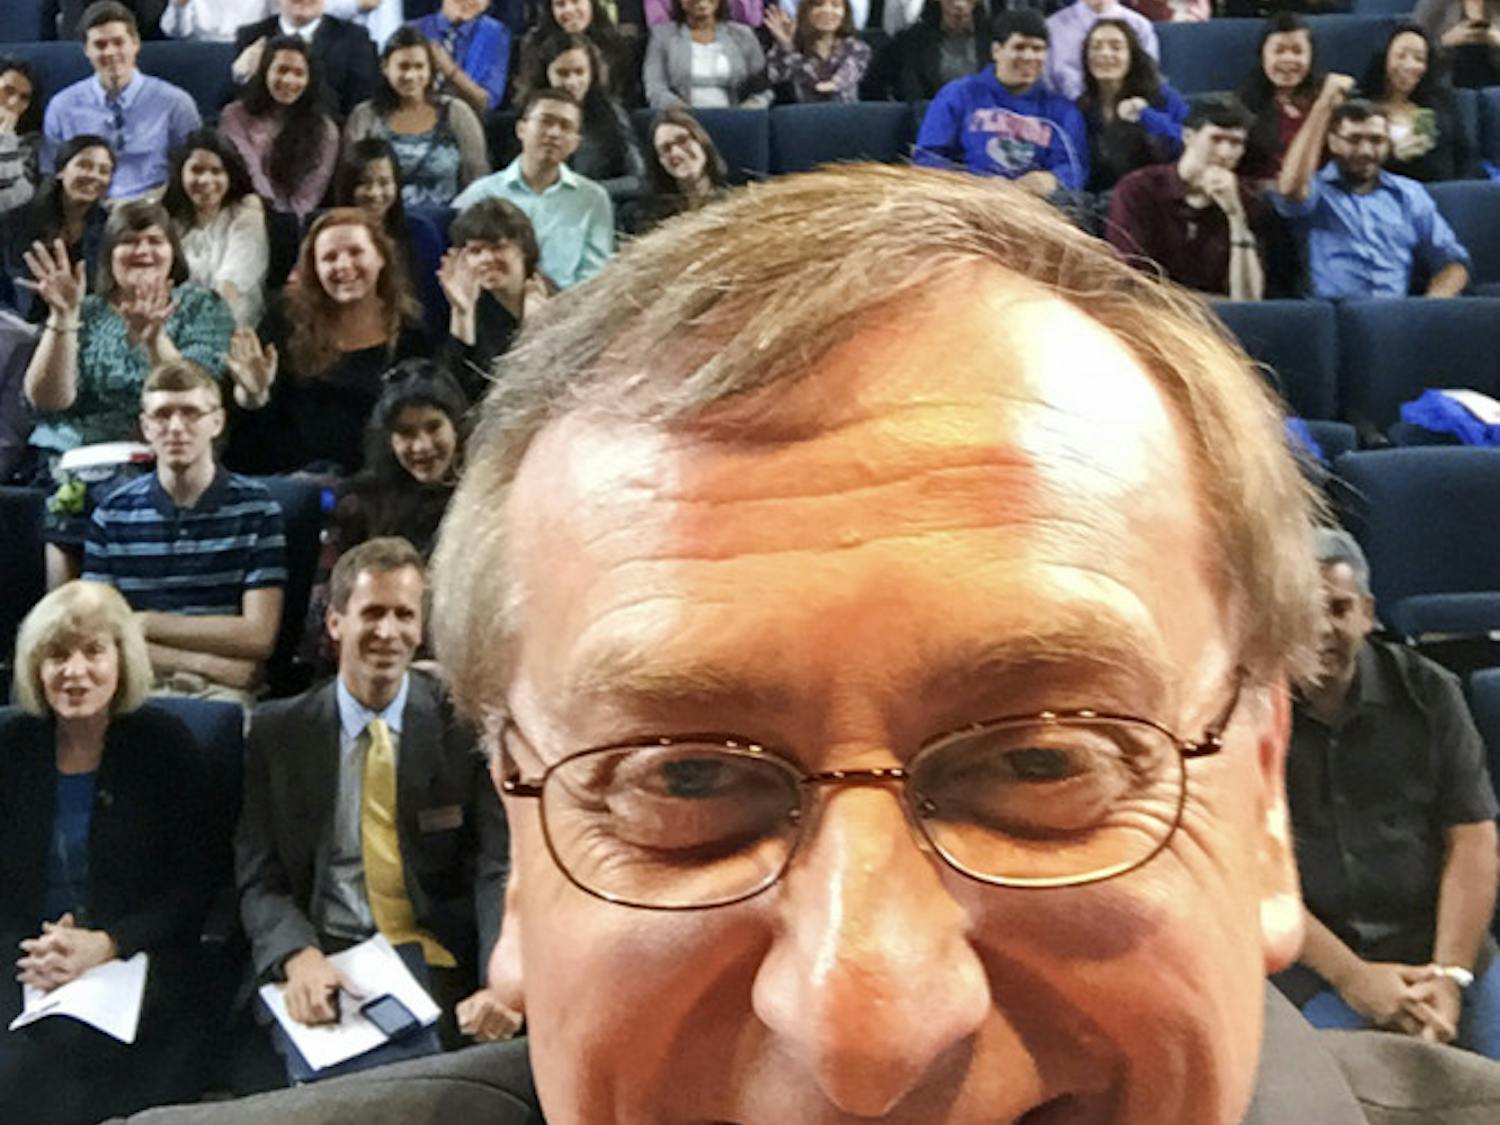 Fuchs takes a selfie in the University Auditorium at the Innovation Academy convocation Jan. 5.